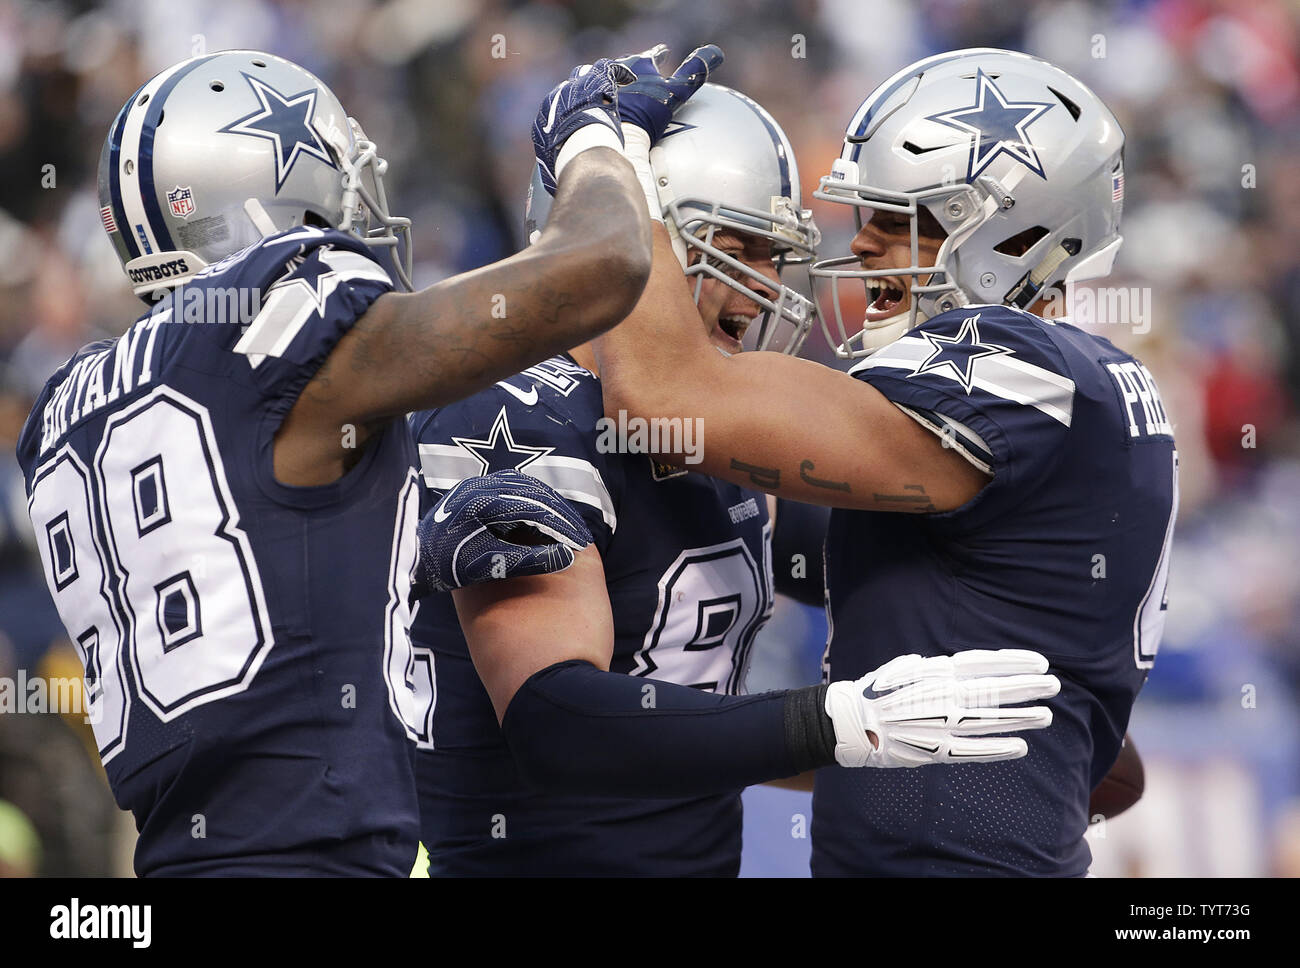 Dallas Cowboys Dak Prescott, Jason Witten and Dez Bryant celebrate a  touchdown against the New York Giants in week 14 of the NFL at MetLife  Stadium in East Rutherford, New Jersey on